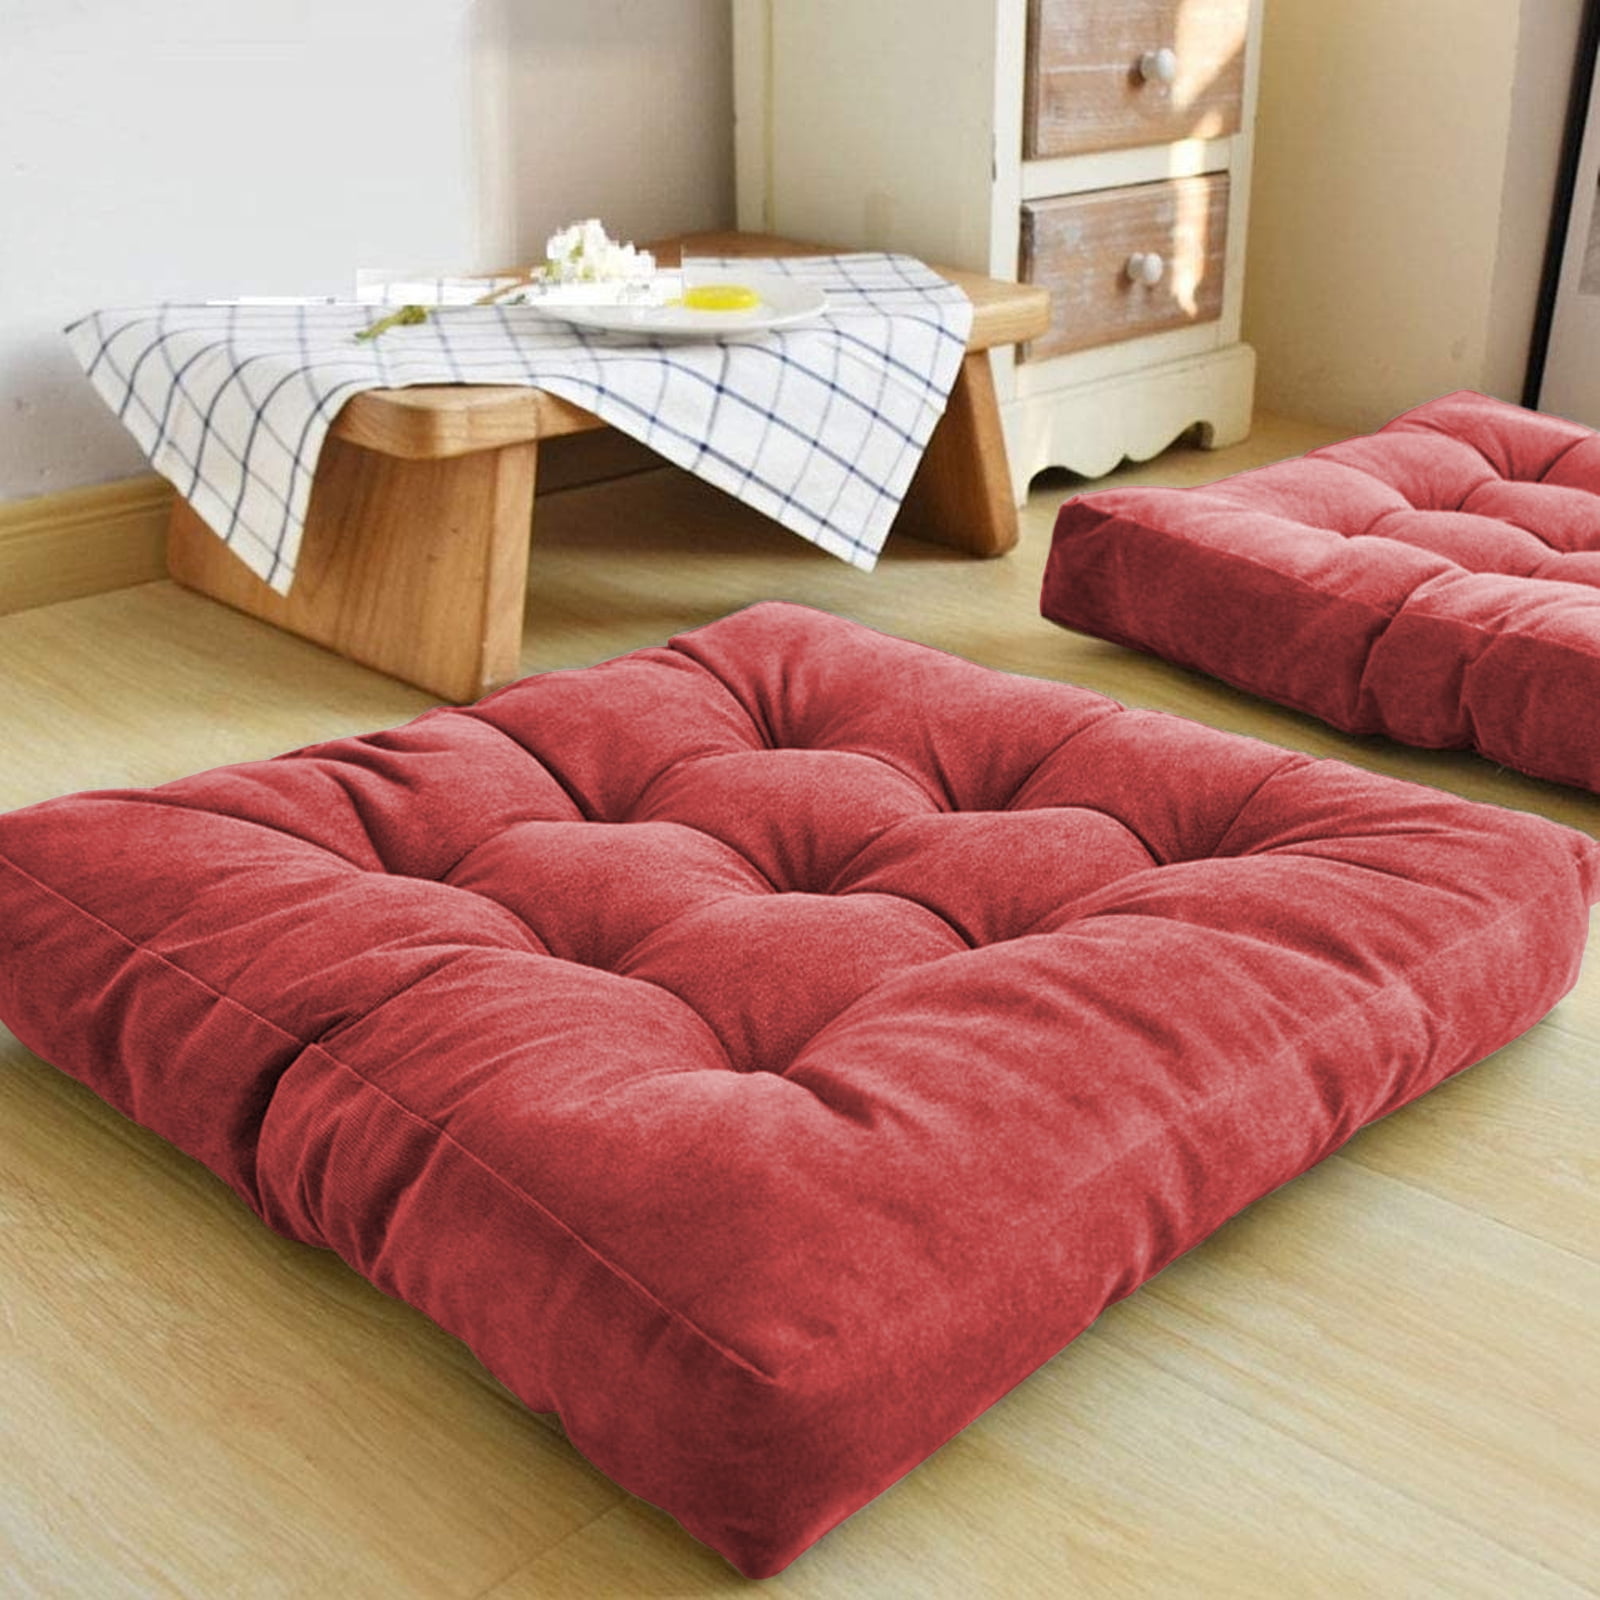 23''x23'' Large Square Thicken Velvet Seat Cushion, Floor Cushion Large Square with Handle Floor Cushion Tatami Pillow Cotton Filling Pad for Floor